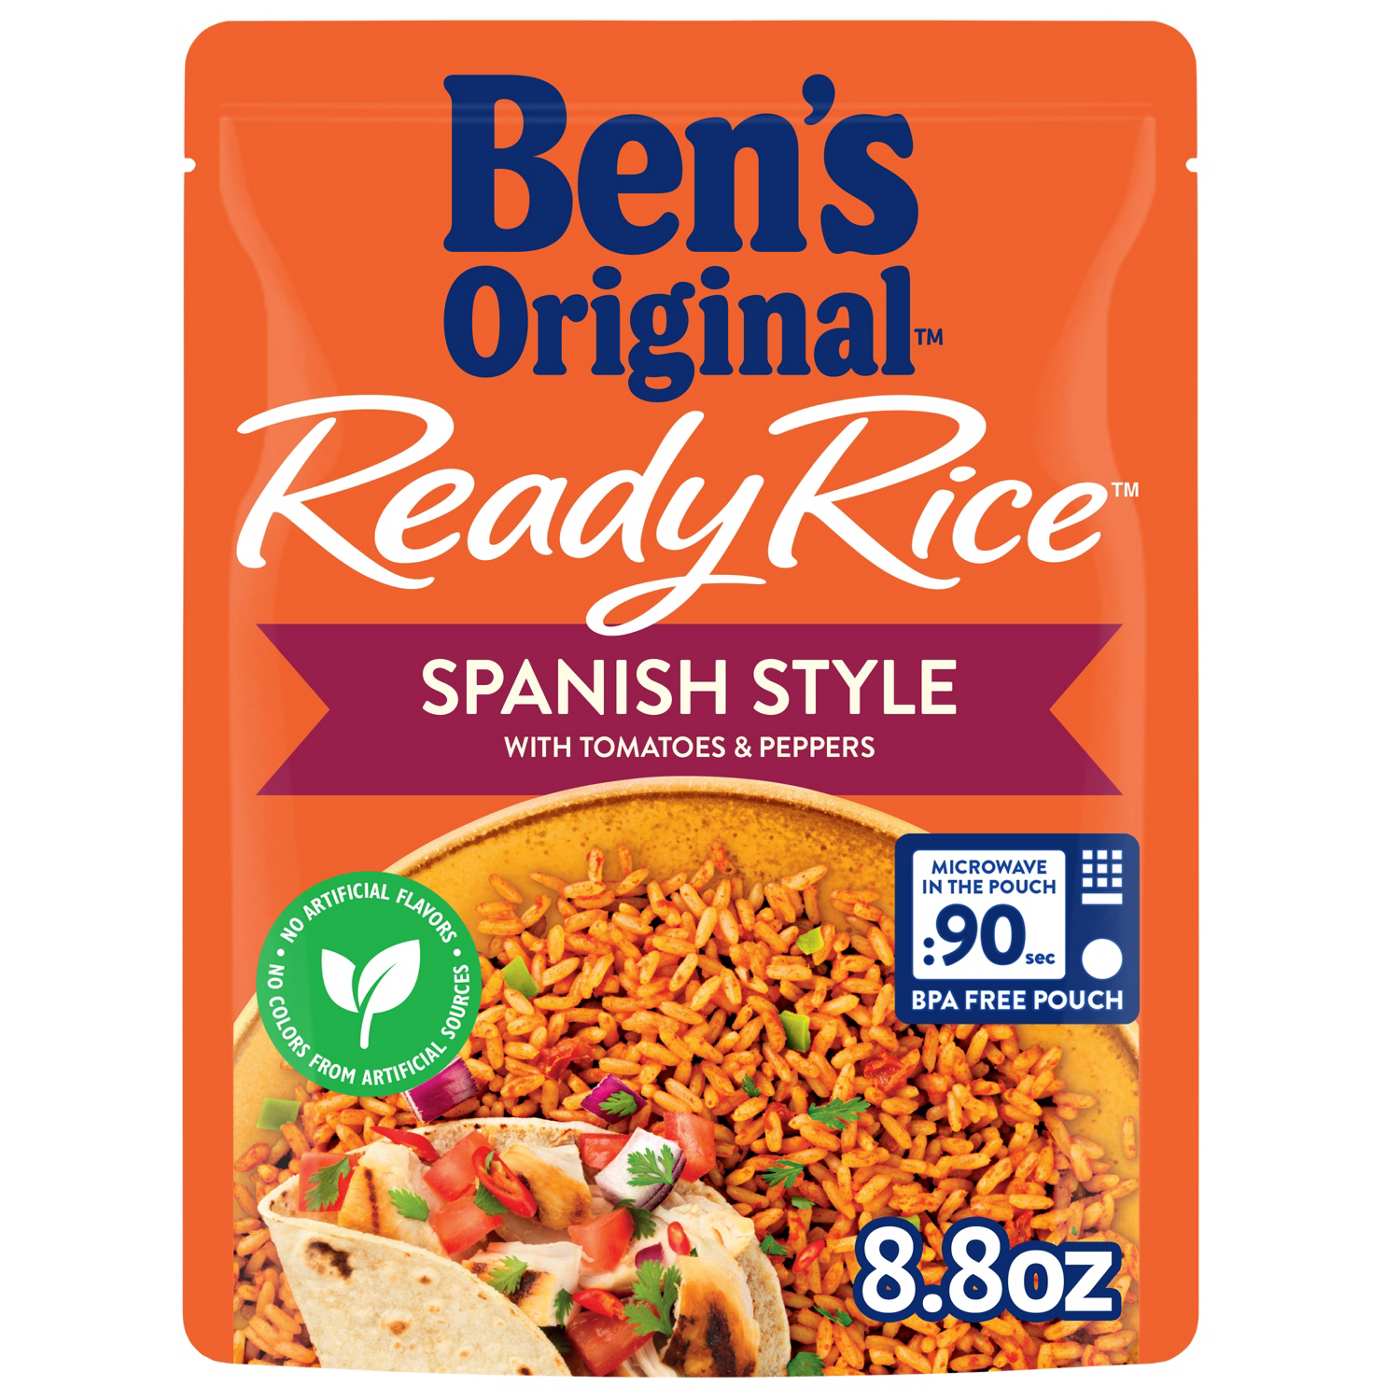 Ben's Original Ready Rice Spanish Style Flavored Rice; image 1 of 2